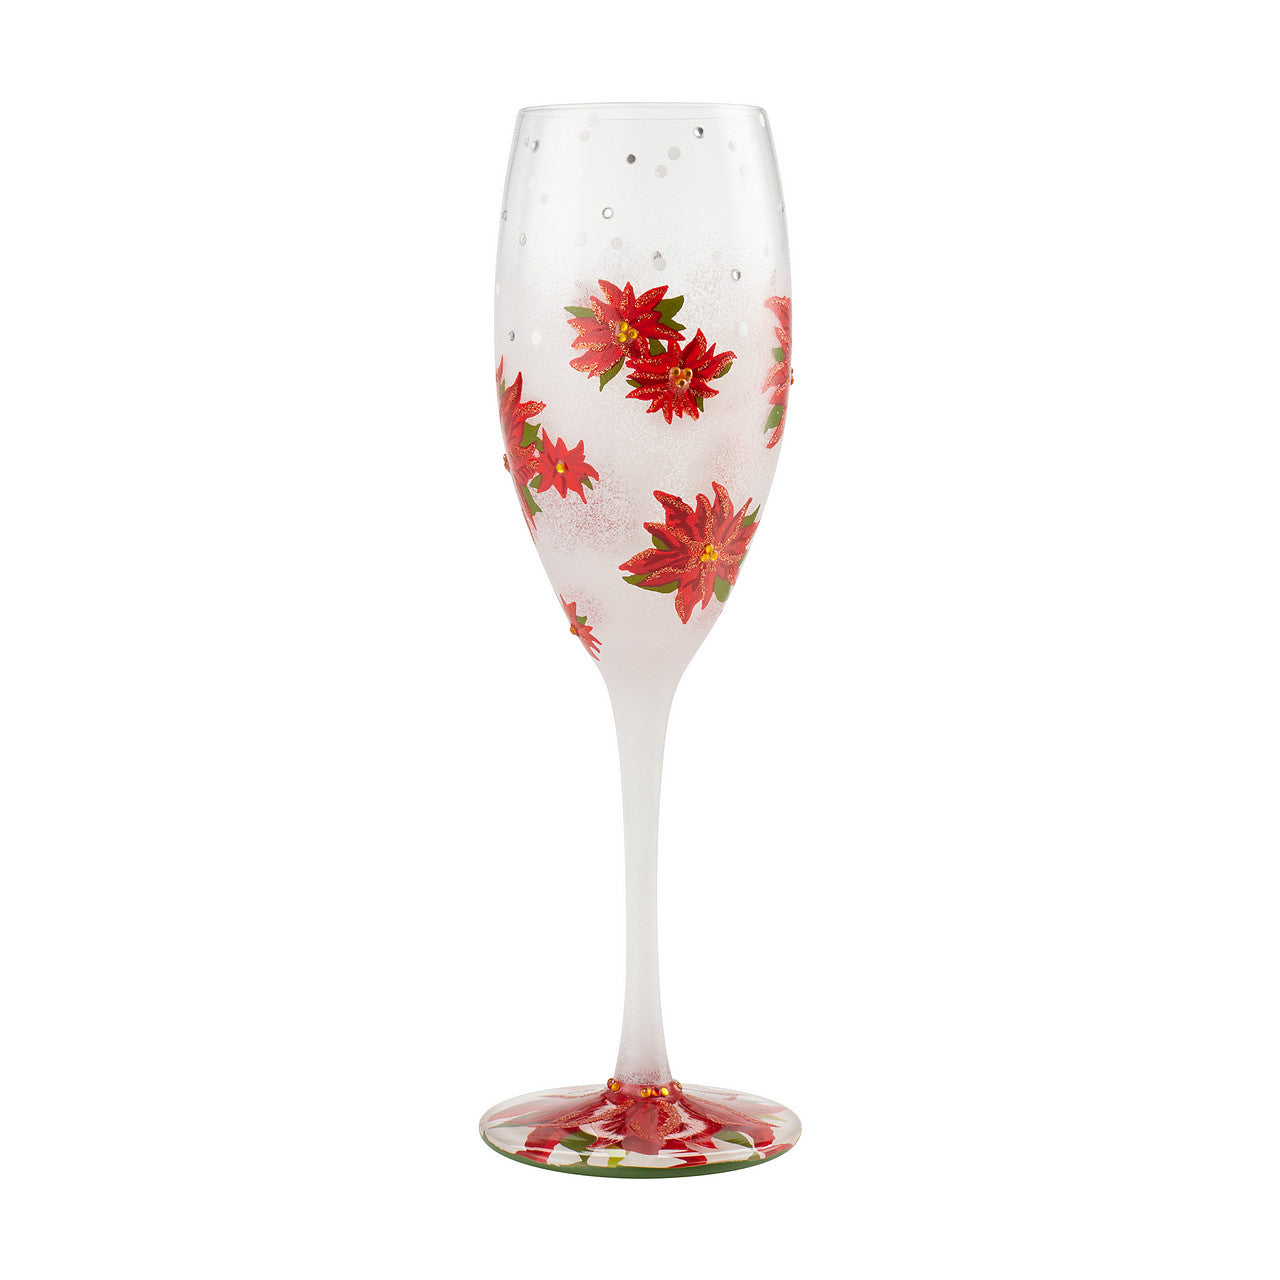 Christmas Lolita Poinsettias In the Snow  The shape of the poinsettia flower and leaves are sometimes thought as a symbol of the Star of Bethlehem which led the Wise Men on the Holy Night. In this glass the holiday flower blooms beautifully in the snow.